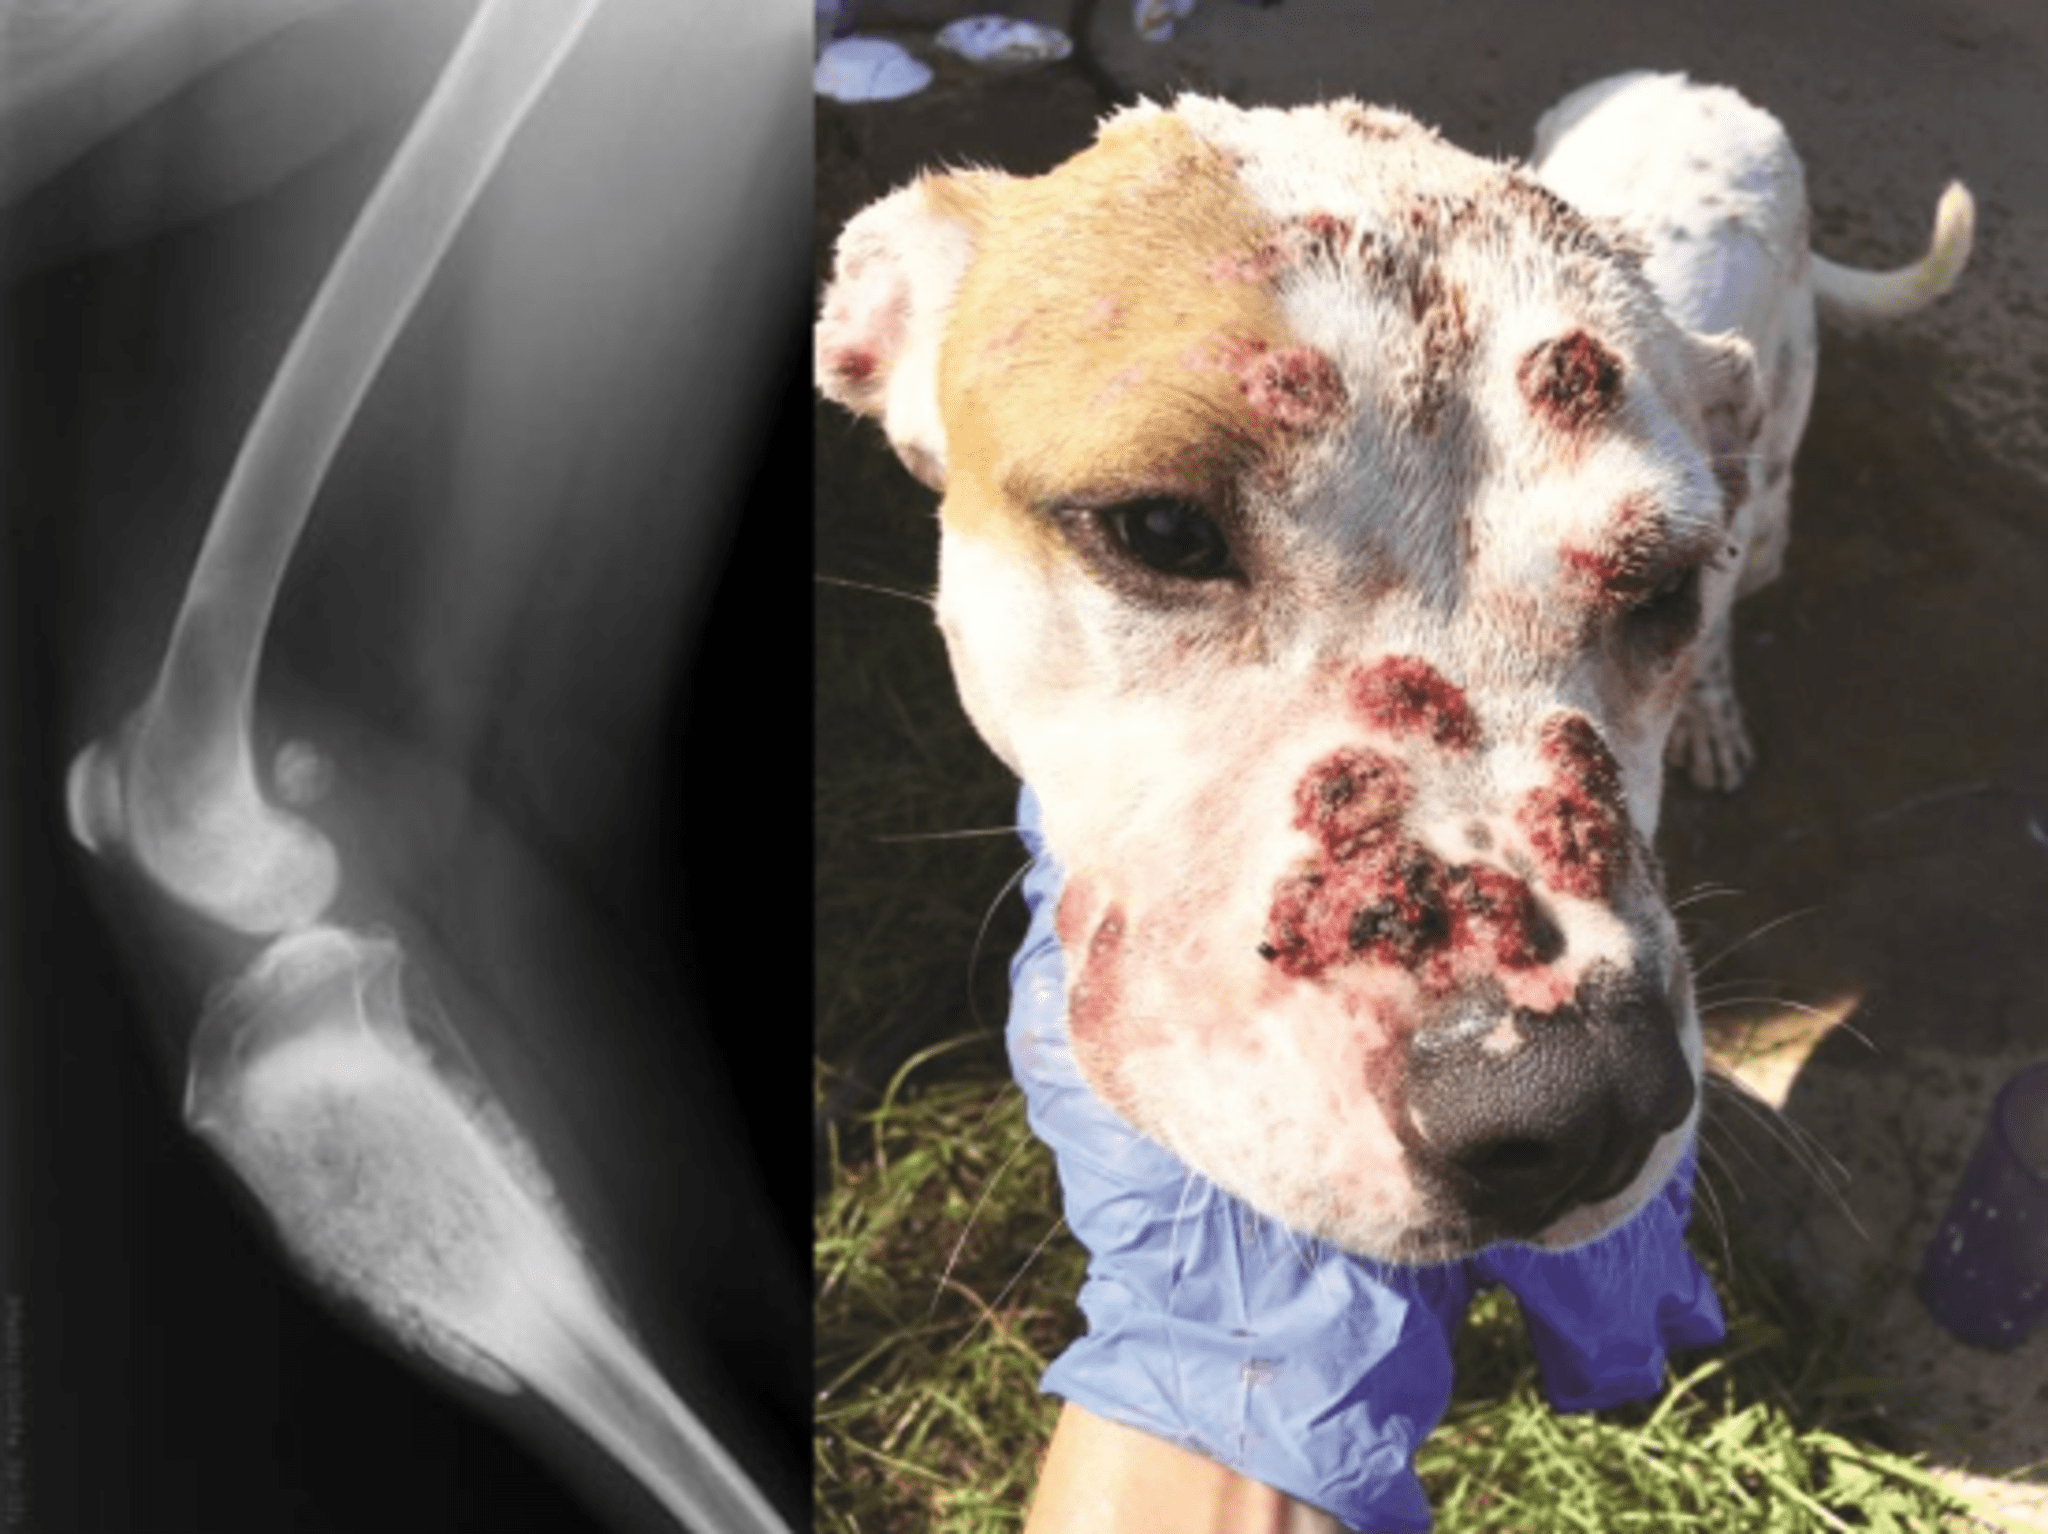 Side by side image of dog leg radiograph and image of dog face with lesions, both caused by Valley Fever